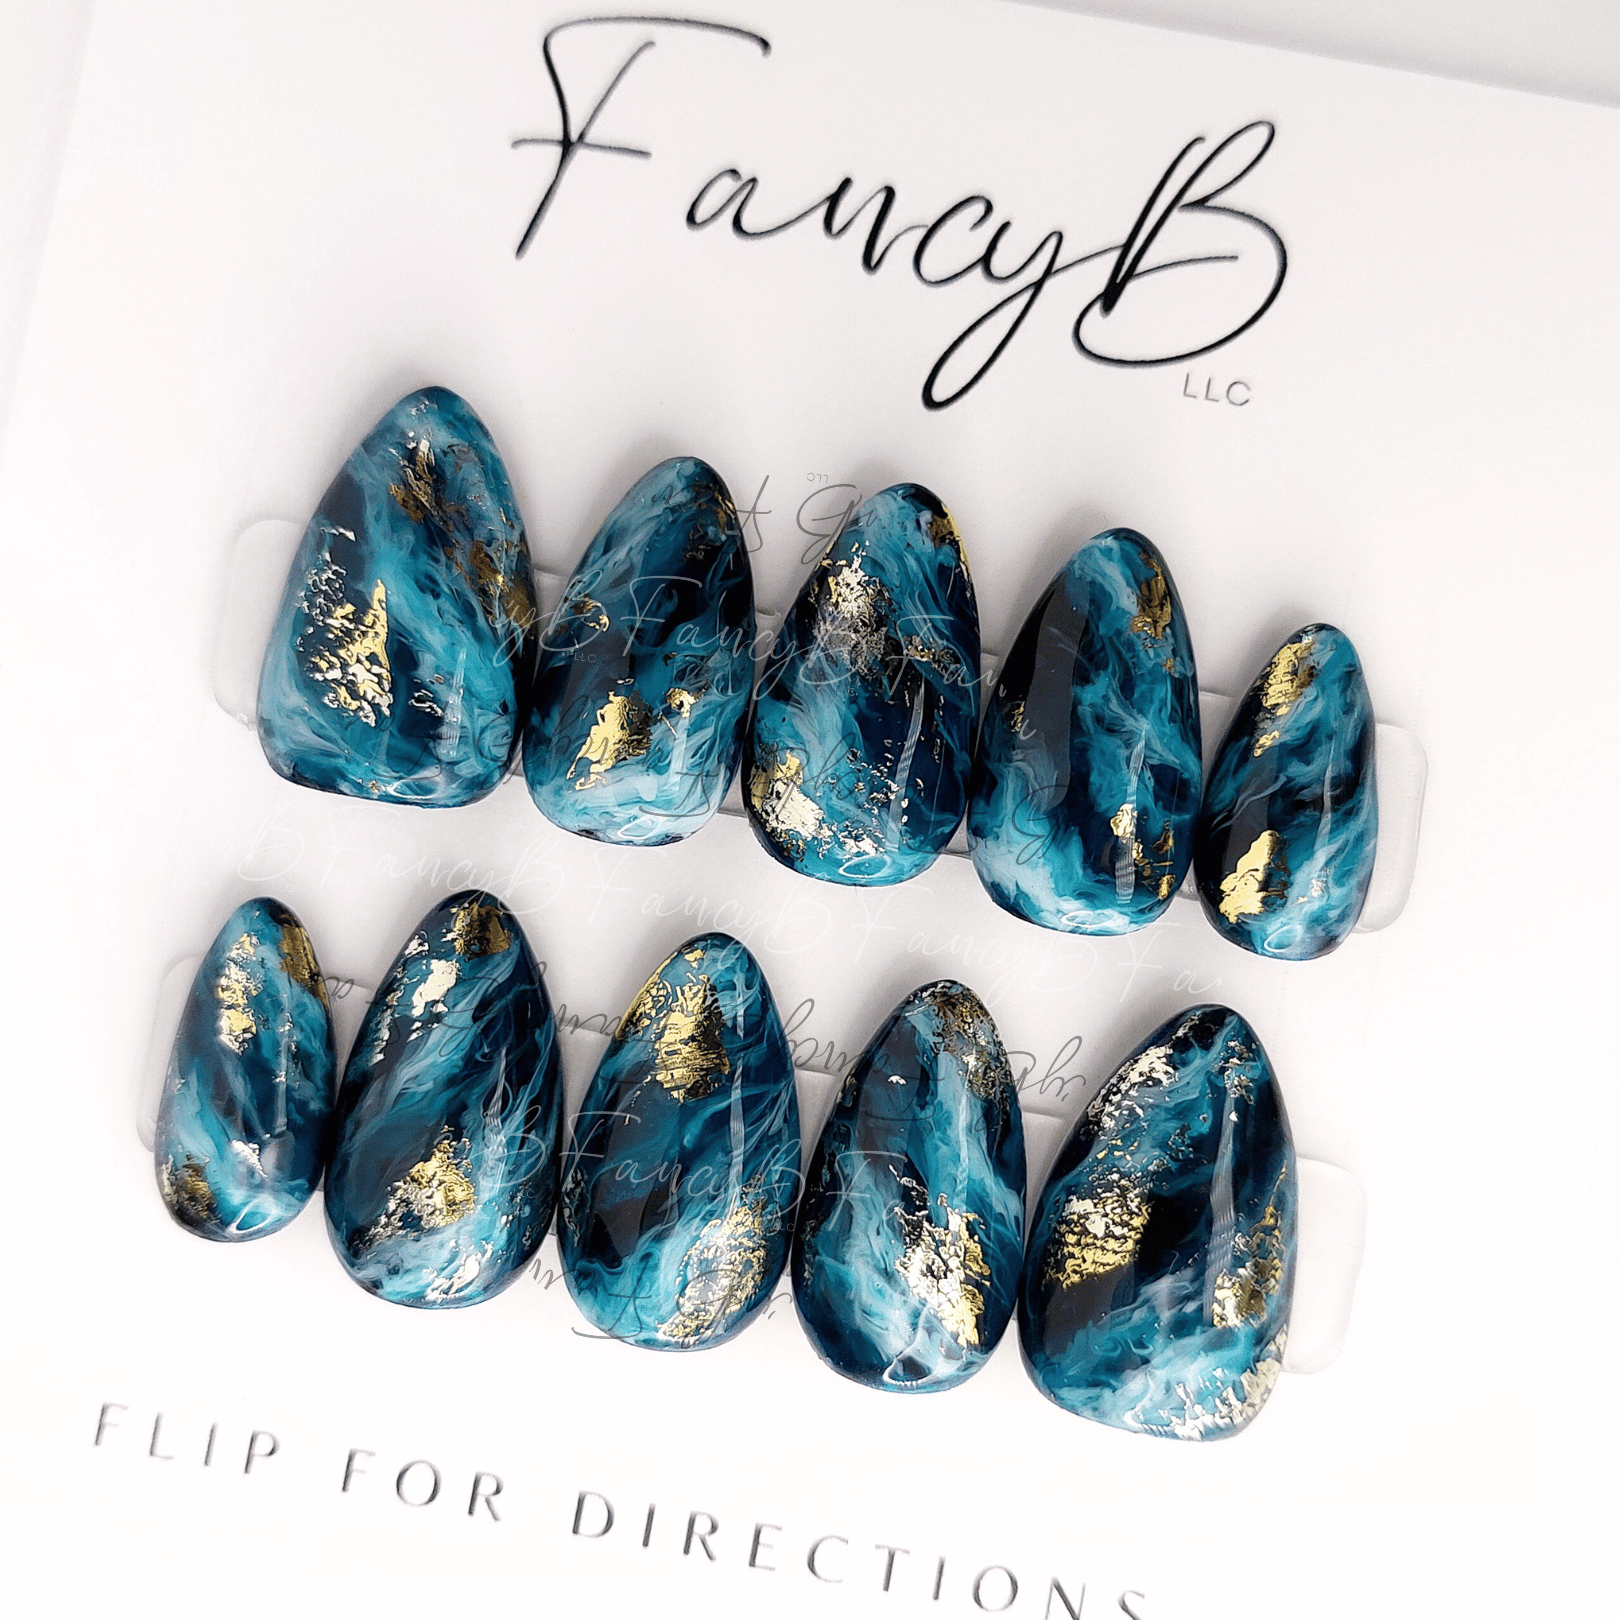 FancyB Nails custom design. Blue marble ocean nails with teal and white designs with gold flakes in short almond nail shape. Custom nail set.